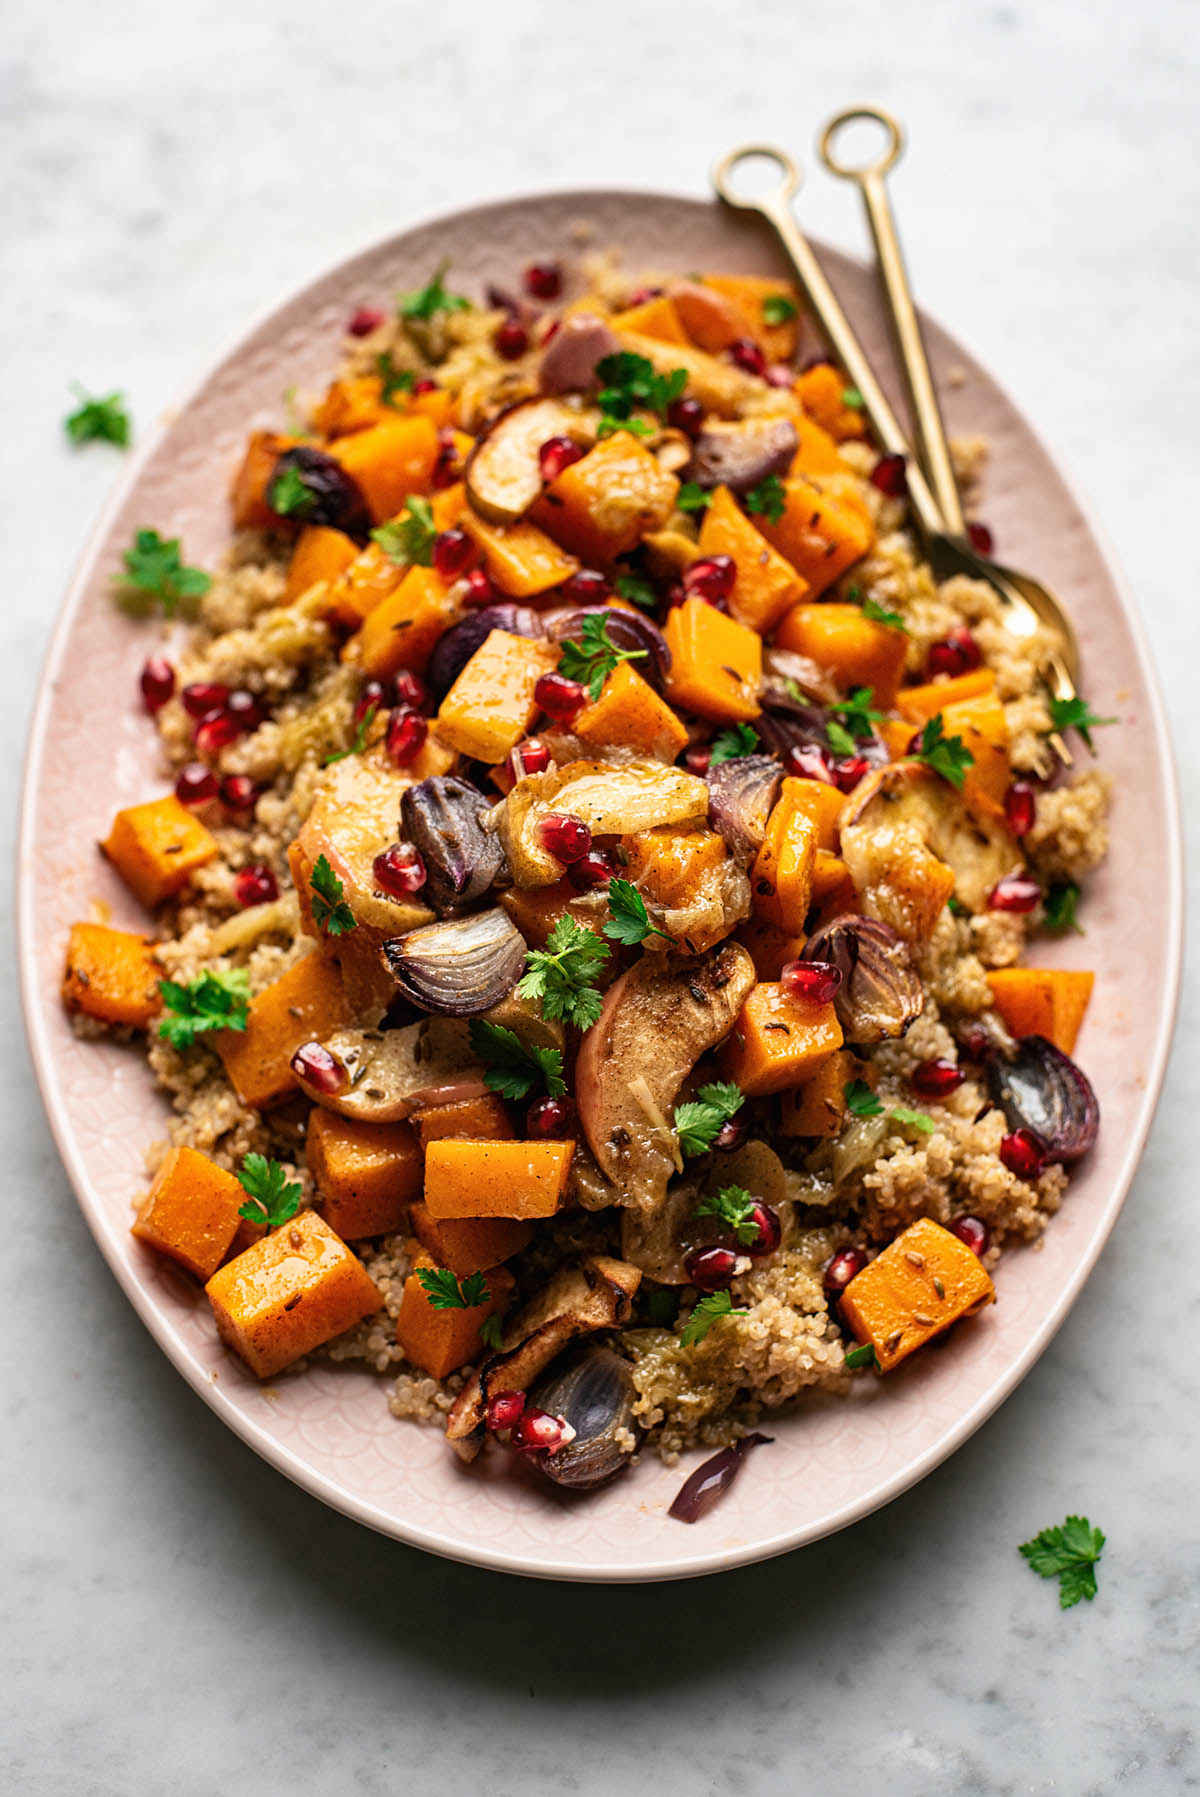 Roasted vegetable and apple salad over quinoa.